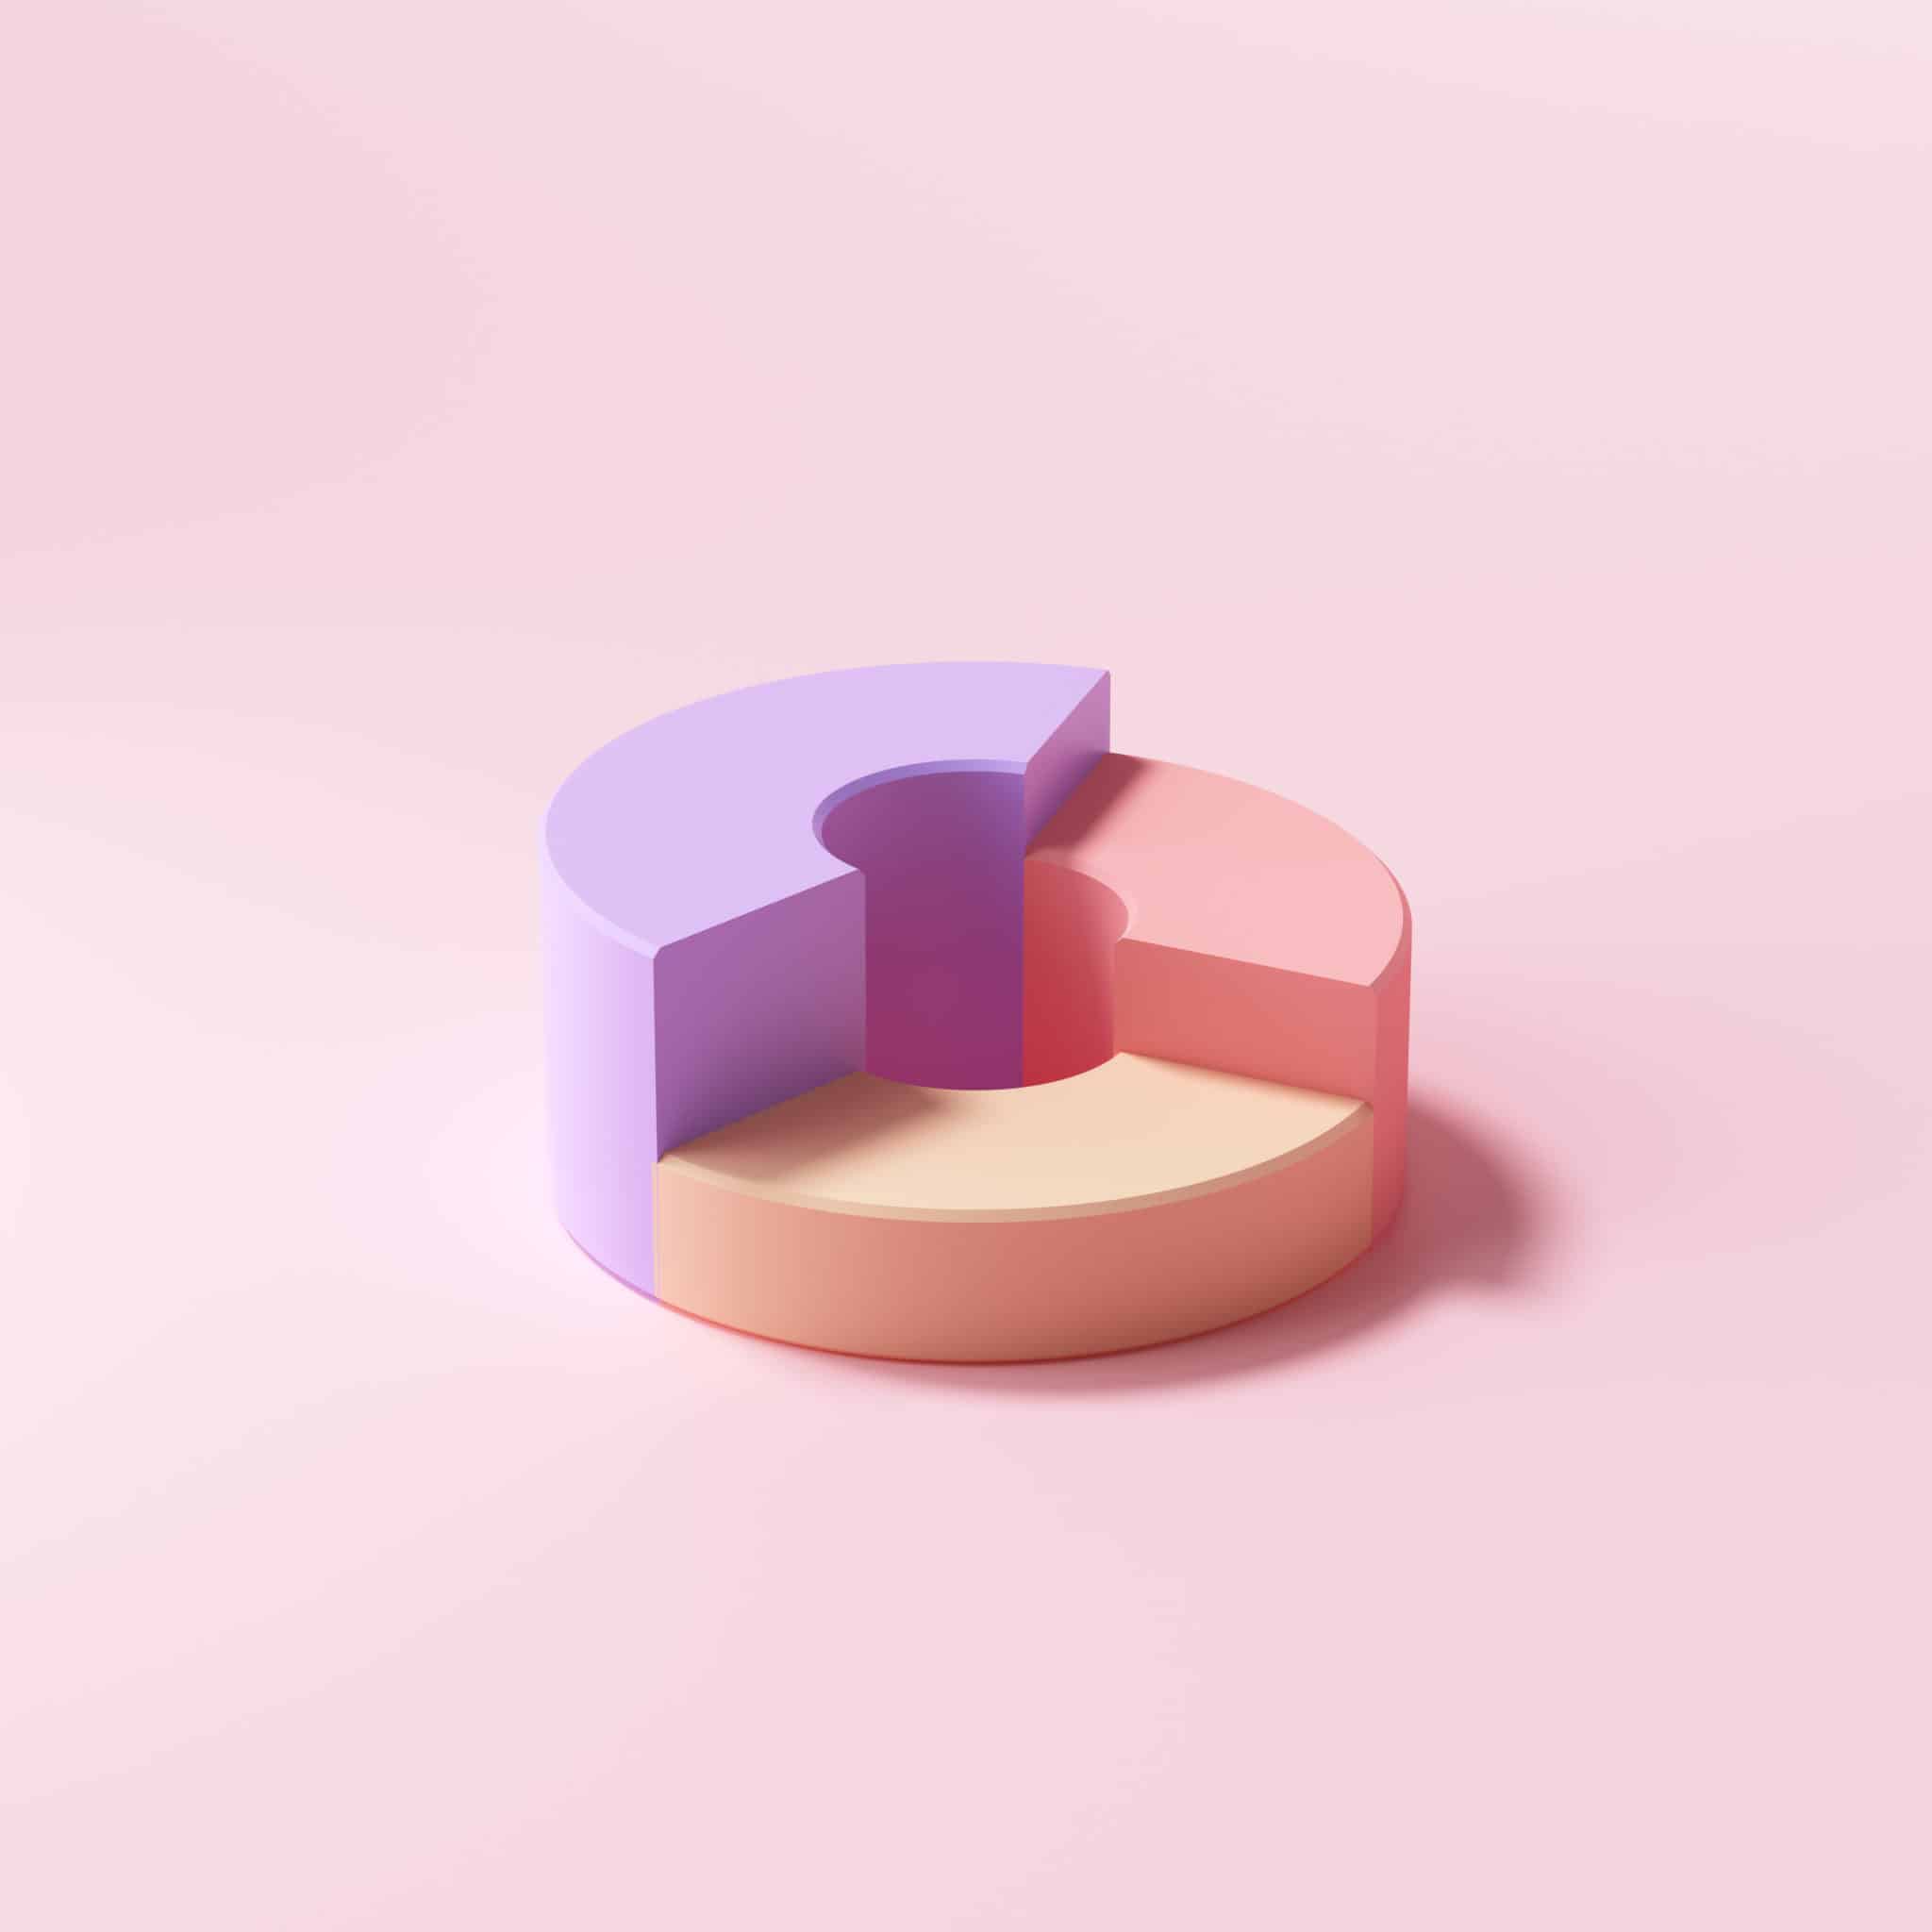 Pink background with three separate coloured pieces (lavender, light pink and light peach) of plastic that make a circle